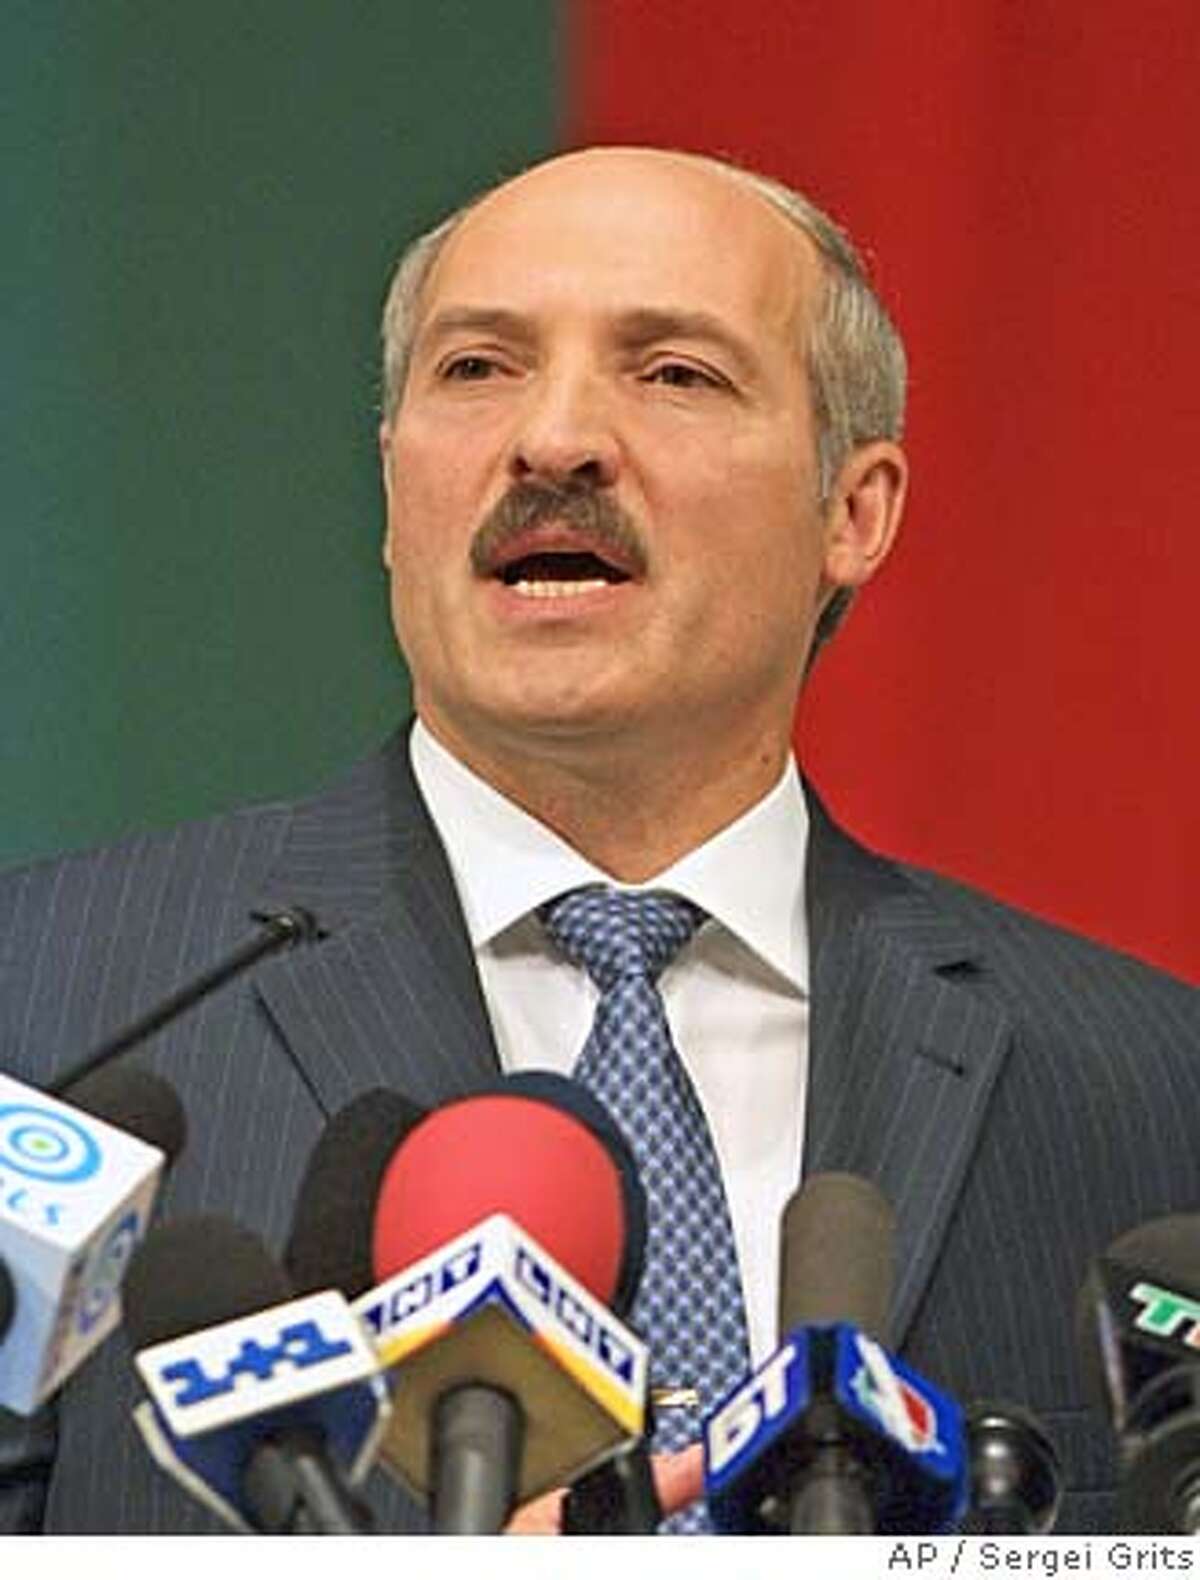 Belarus President Alexander Lukashenko speaks to the media in Minsk, Belarus, Monday, Sept. 10, 2001. Lukashenko said his presidential election victory in this ostracized former Soviet republic Monday was legitimate, even as European monitors pronounced the voting unfair. (AP Photo/ Sergei Grits) DIGITAL IMAGE